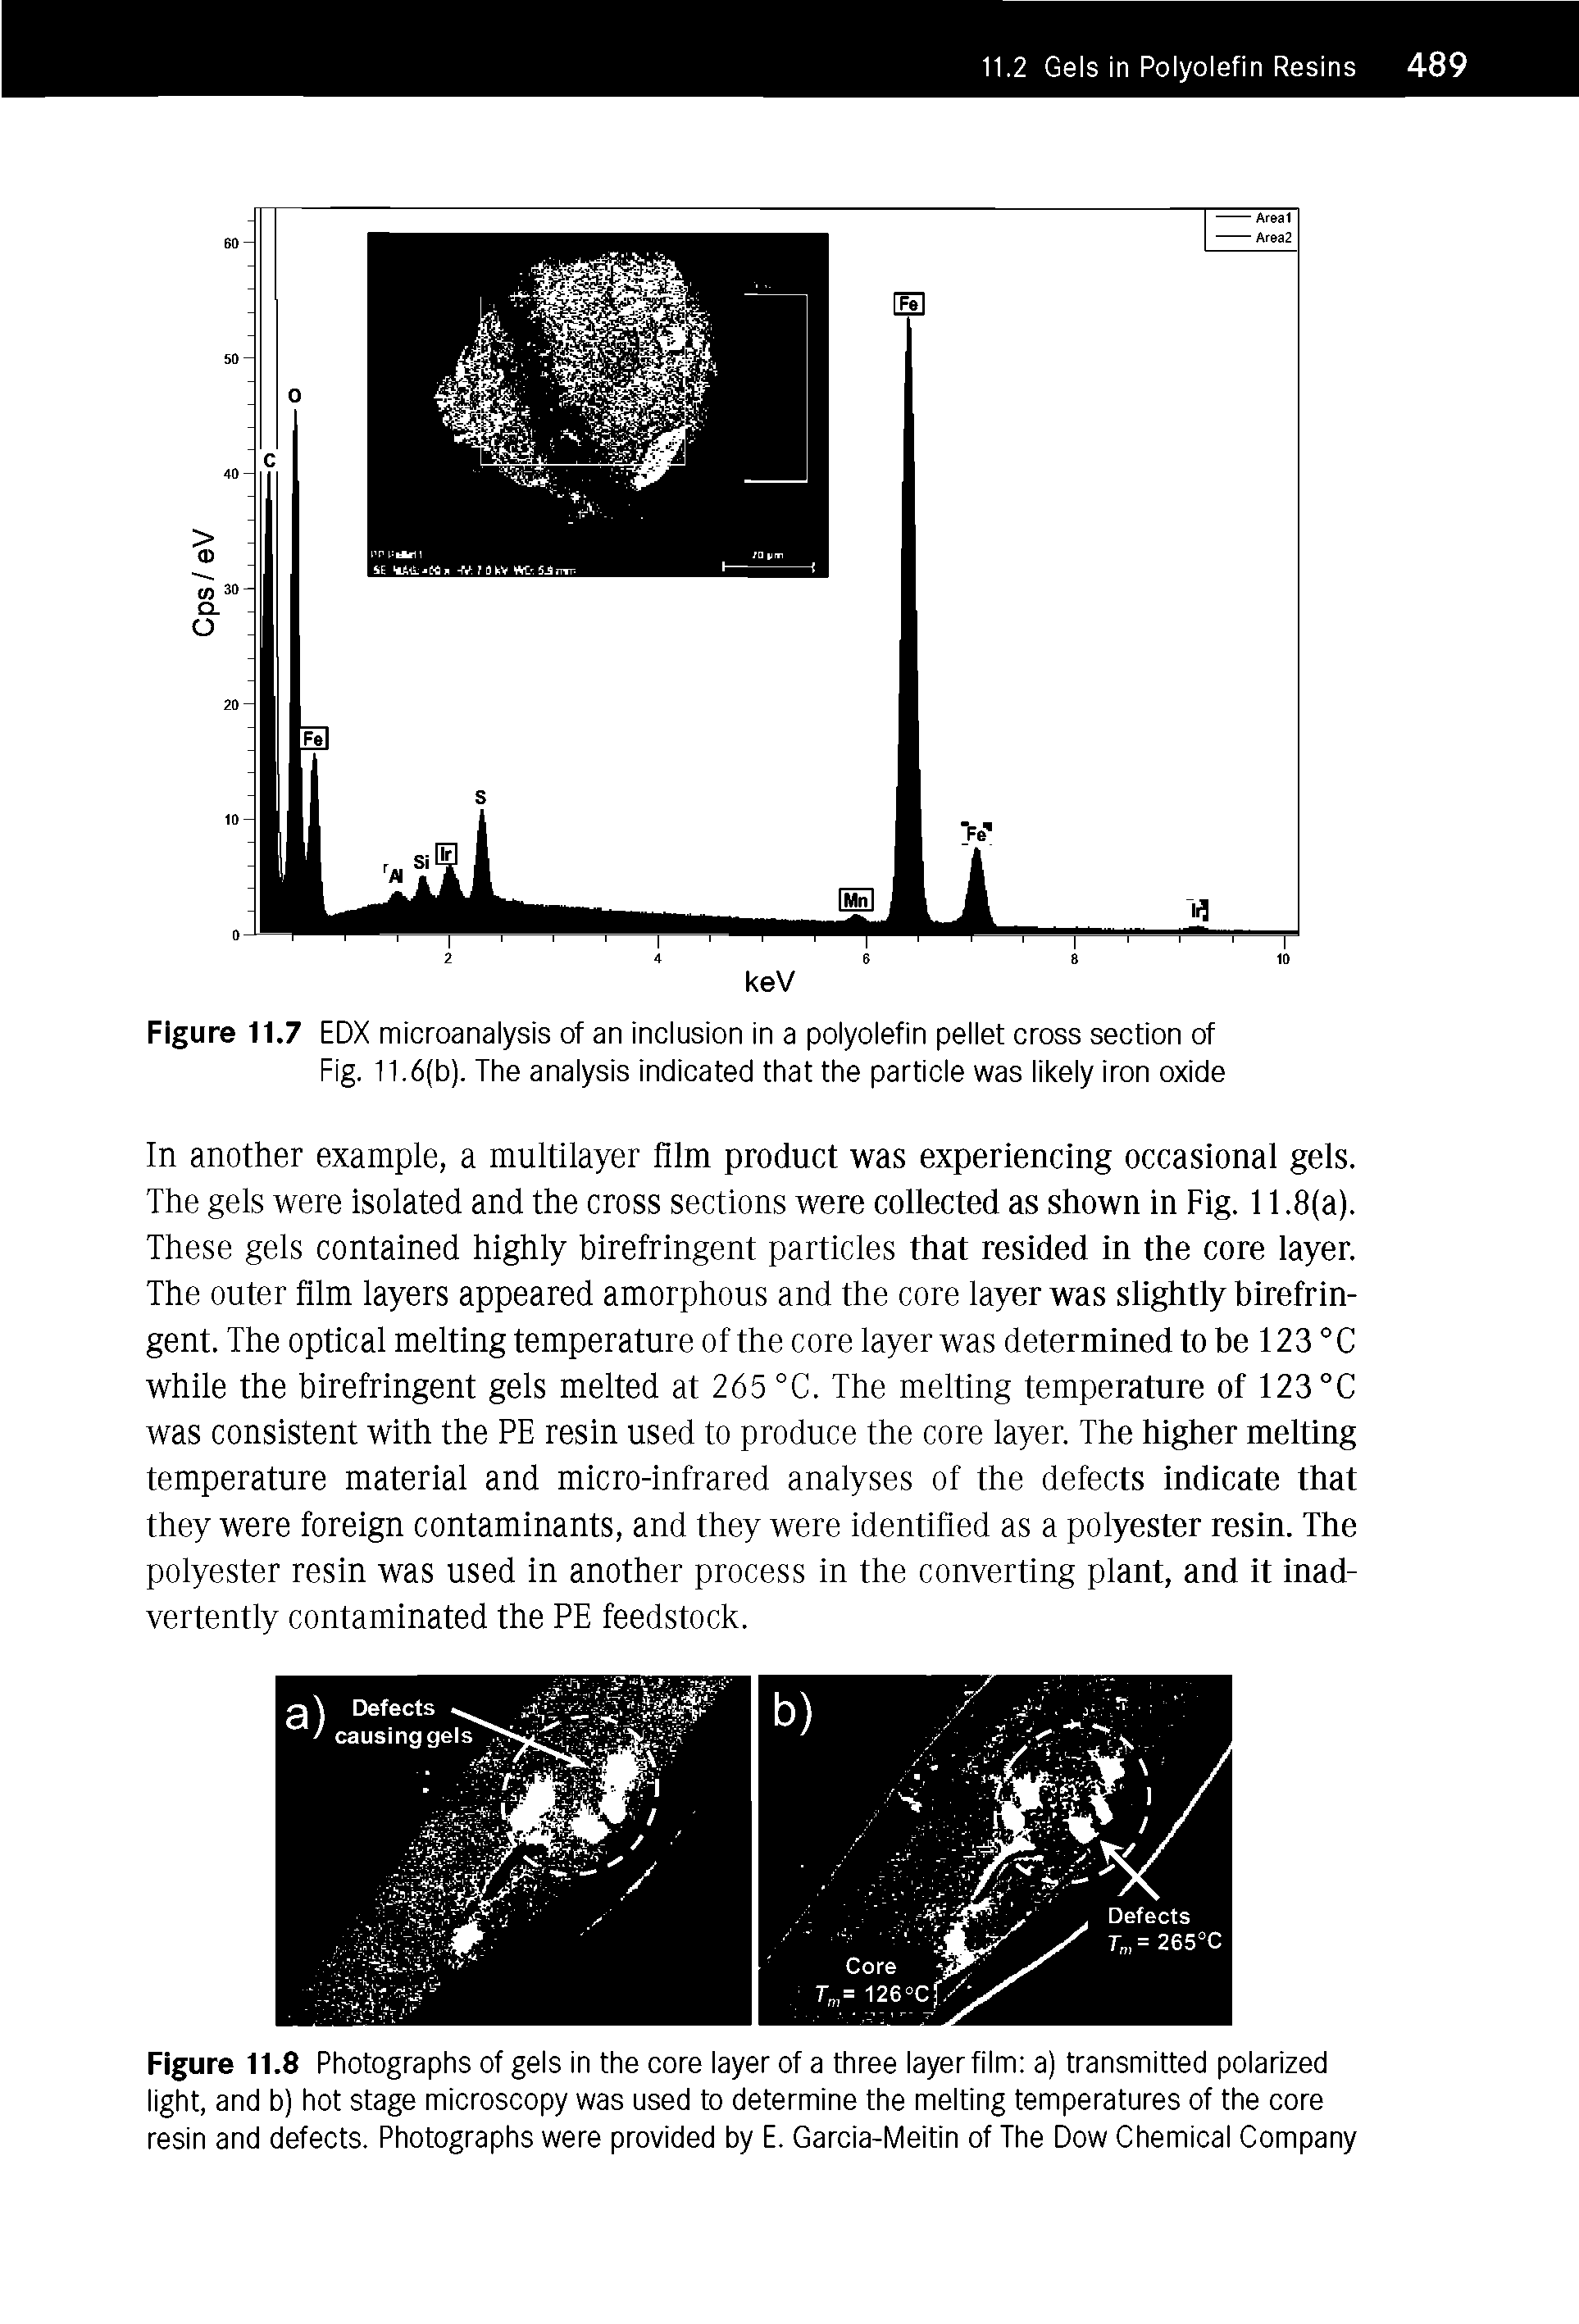 Figure 11.8 Photographs of gels In the core layer of a three layer film a) transmitted polarized light, and b) hot stage microscopy was used to determine the melting temperatures of the core resin and defects. Photographs were provided by E. Garcia-Meitin of The Dow Chemical Company...